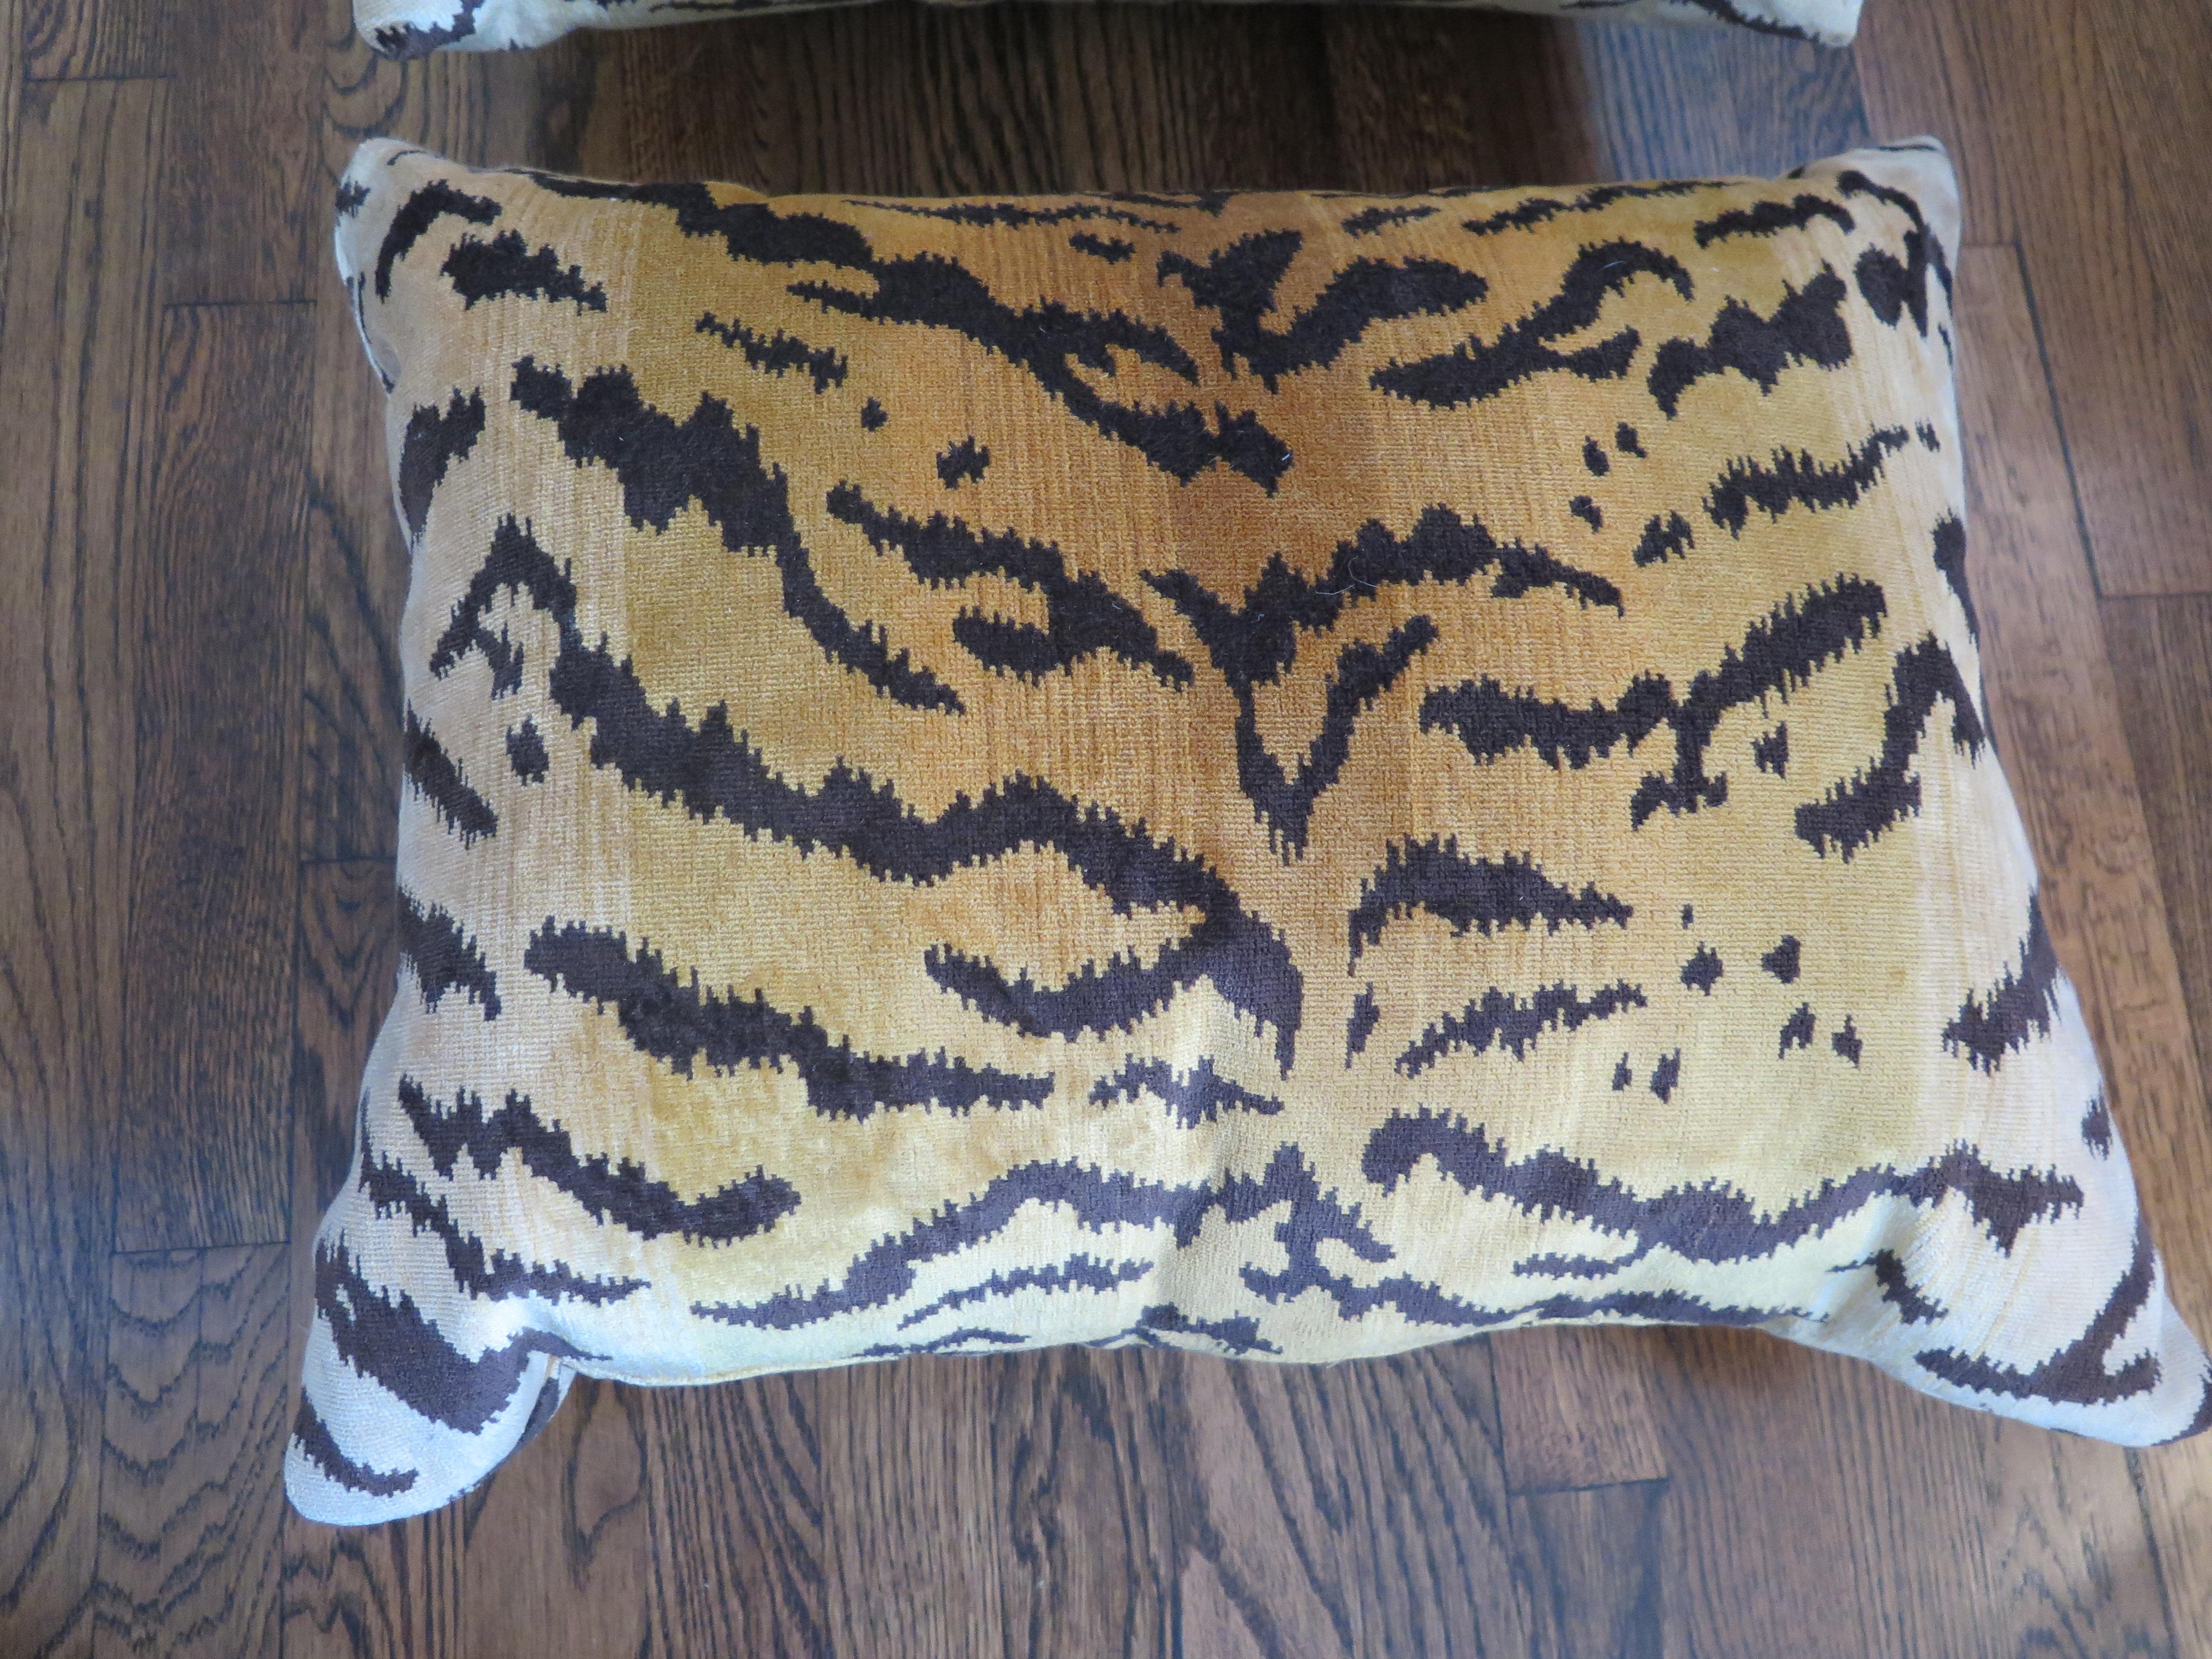 Scalamandré Le Tigre silk velvet pillows made-to-order custom pillows. The price listed is per pillow. We currently have the pair in the picture available, but we can make more in a 4-6 week lead time. We can make any size or with any edge detail or